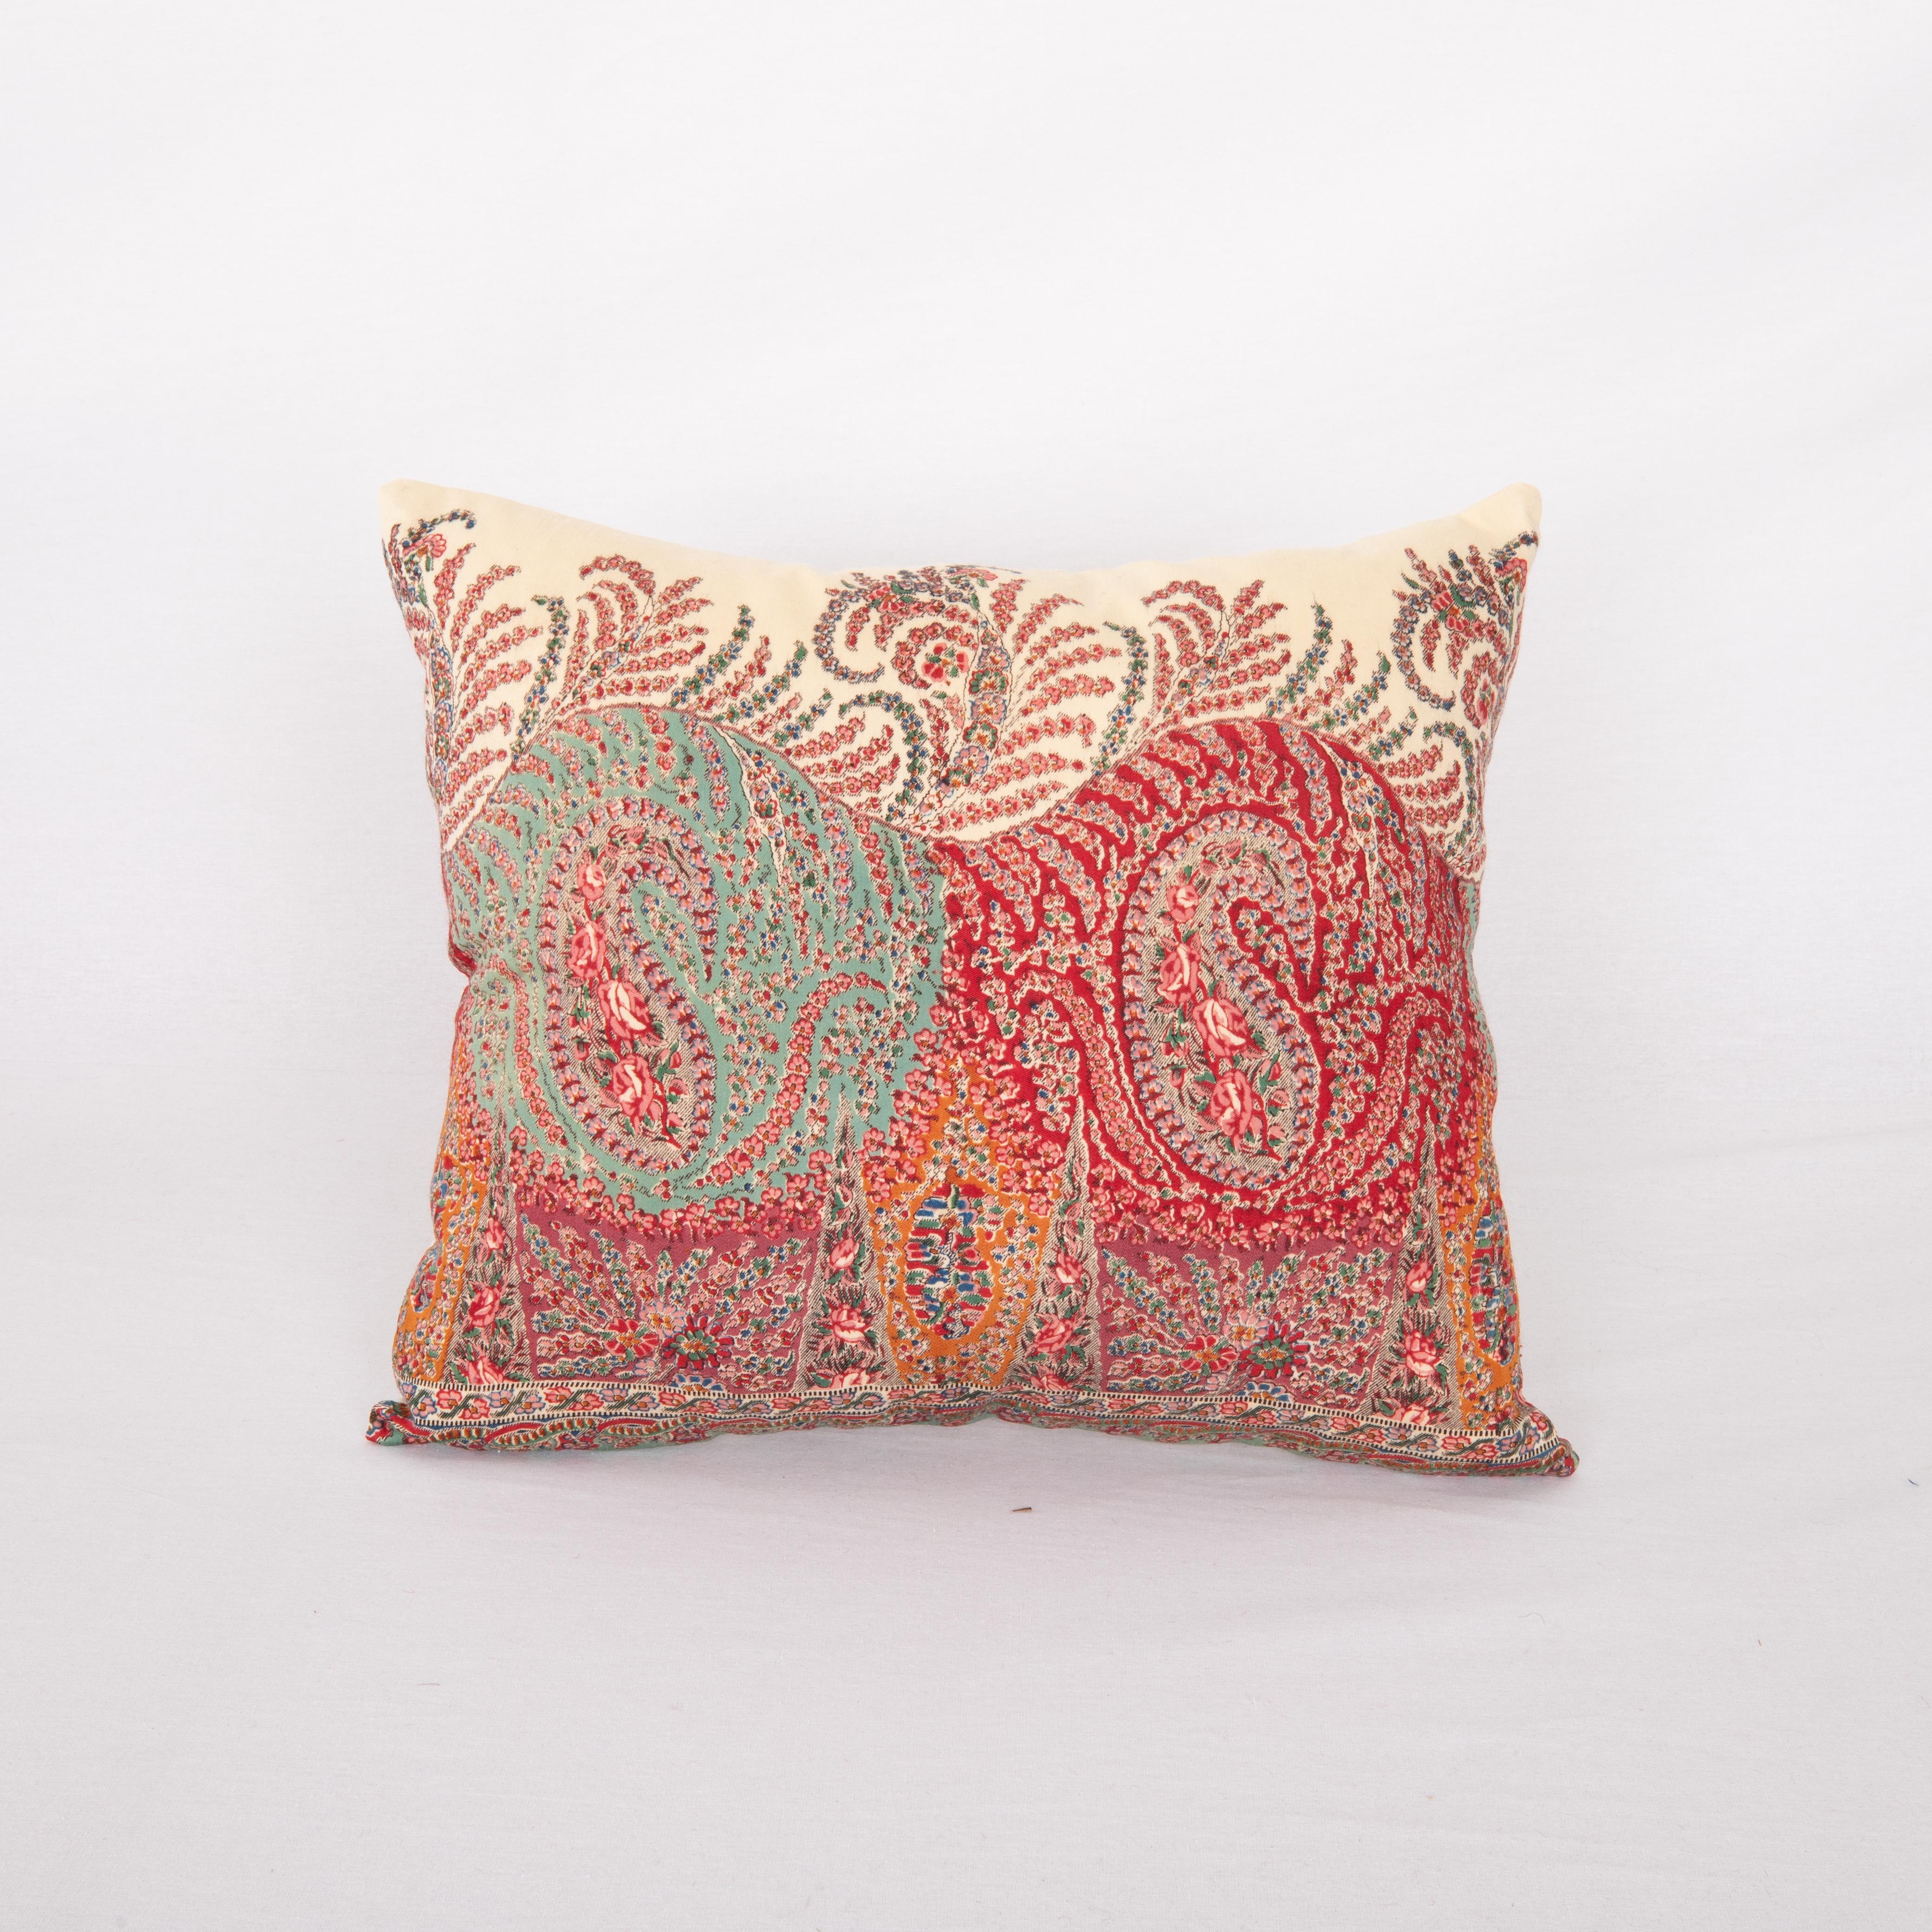 Pillow Cover Made from an English Printed Shawl, 19th C. For Sale 1